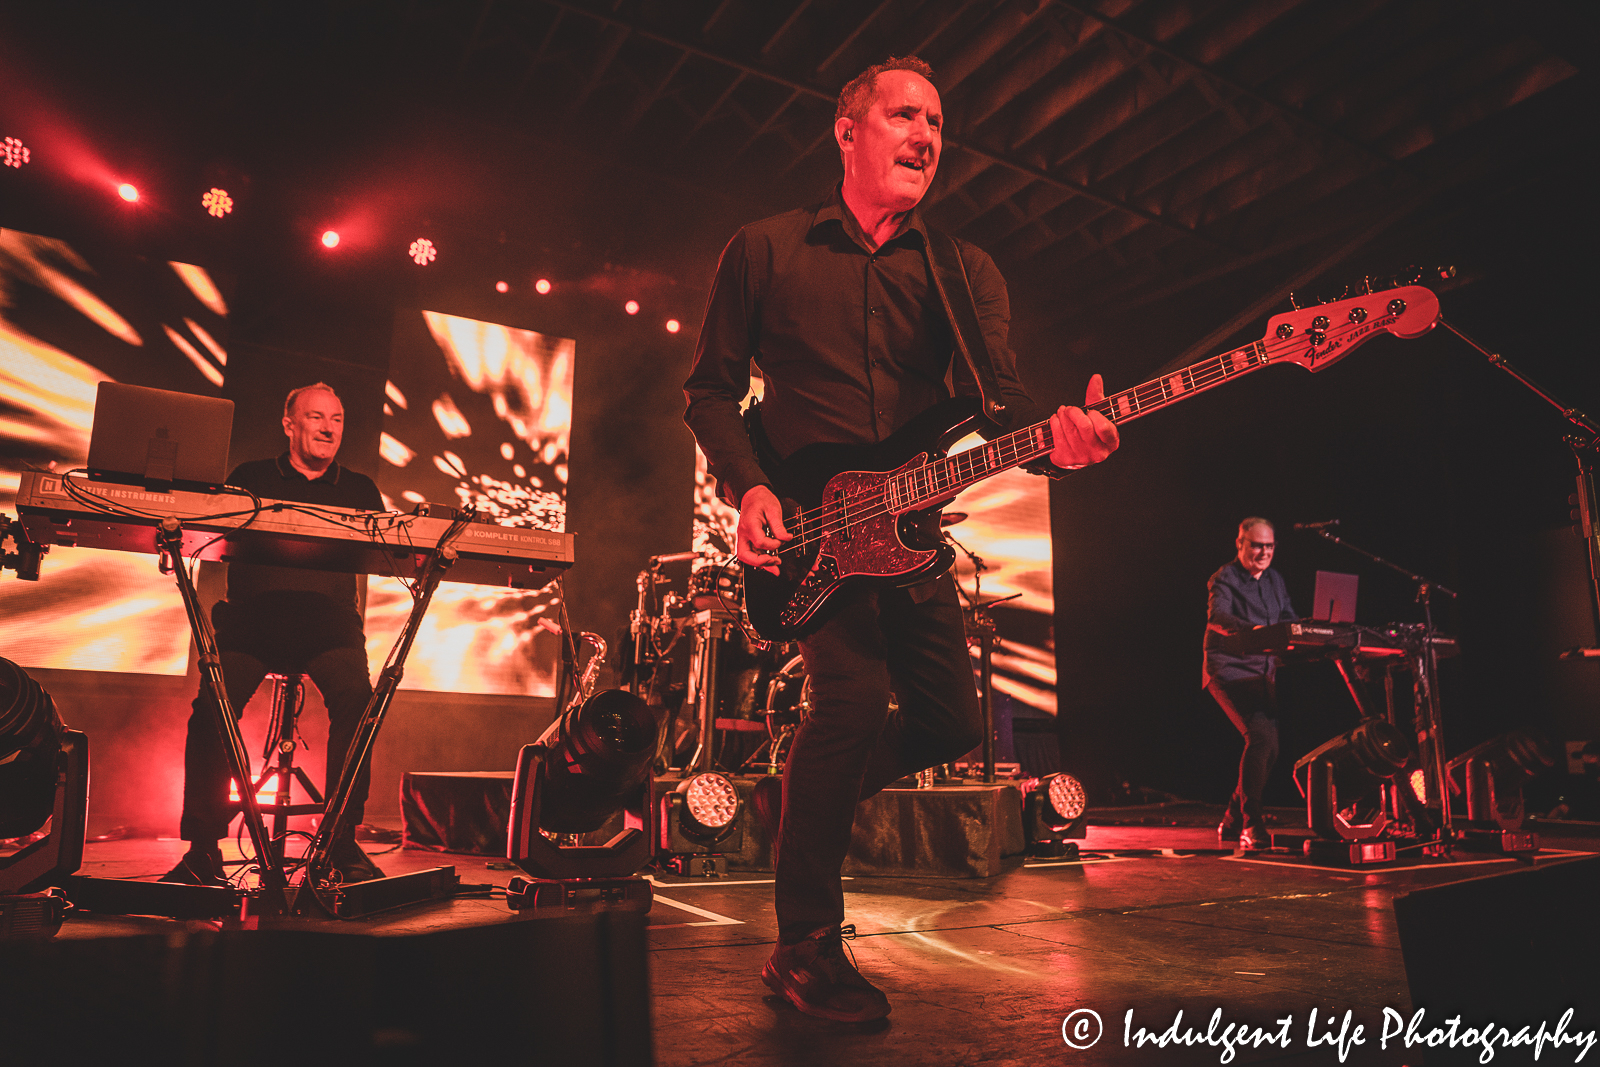 OMD band members Andy McCluskey, Martin Cooper and Paul Humphreys playing together at The Truman in Kansas City, MO on May 8, 2022.